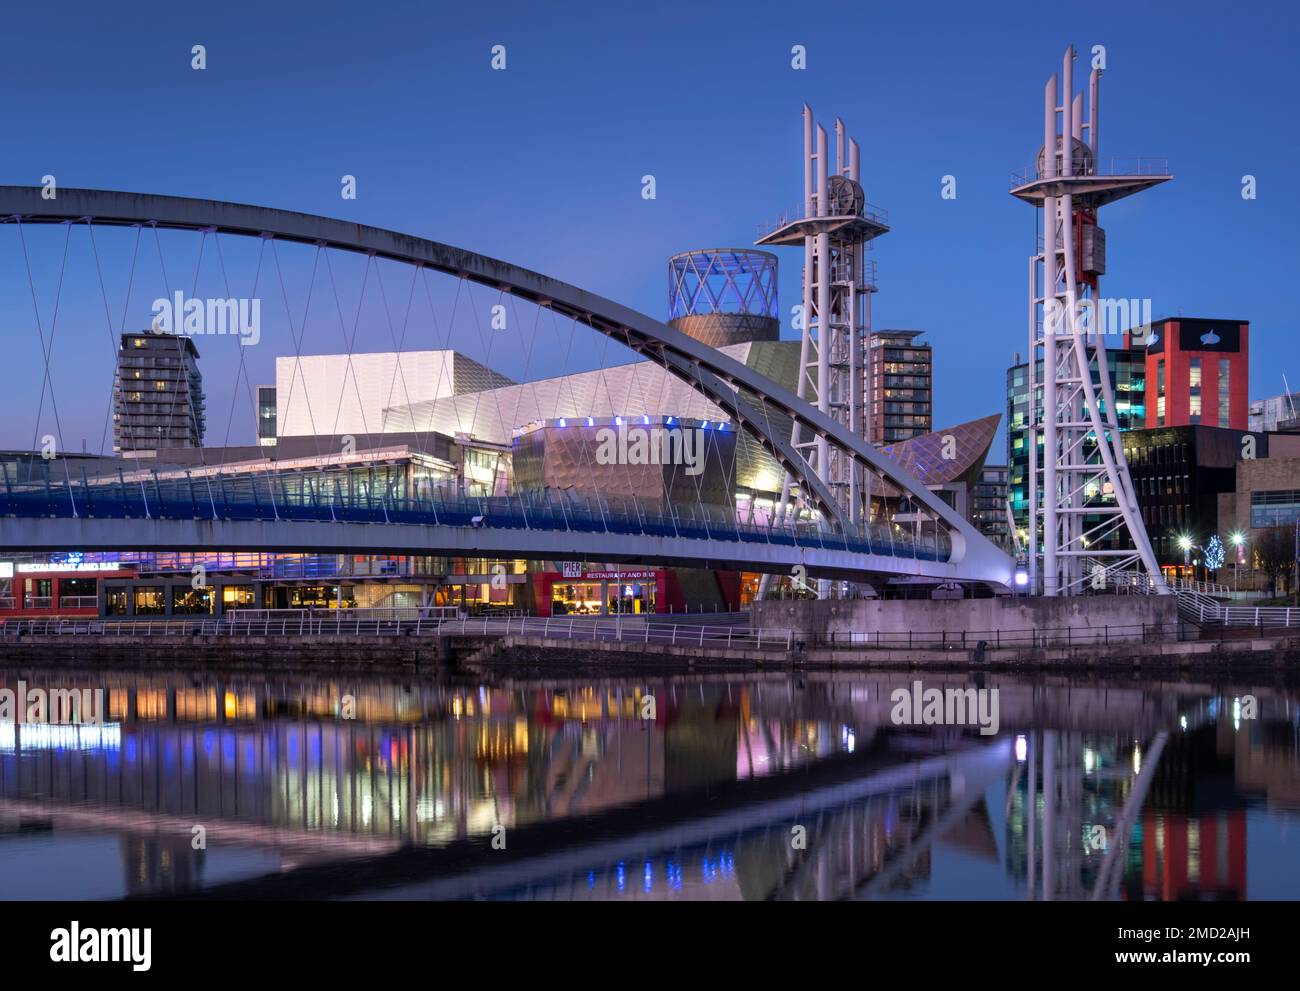 The Lowry Footbridge & Lowry Centre at night, Salford Quays, Salford, Manchester, England, UK Stock Photo